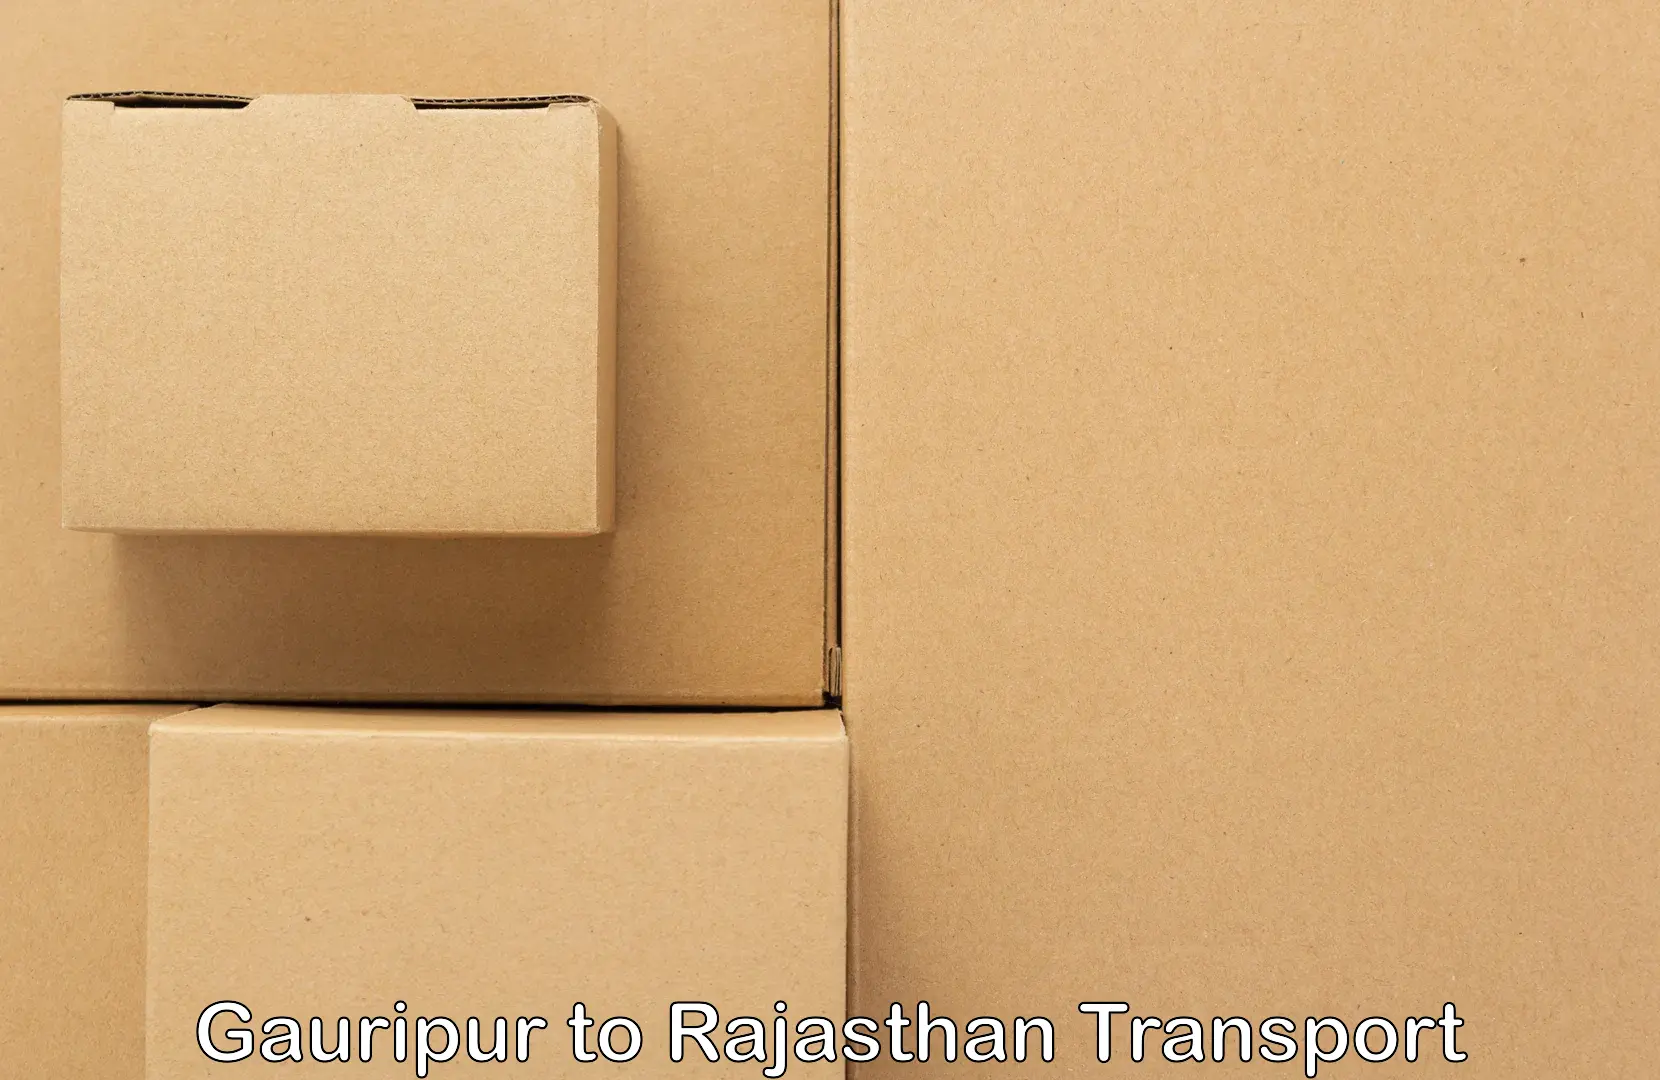 Cycle transportation service Gauripur to Rajasthan